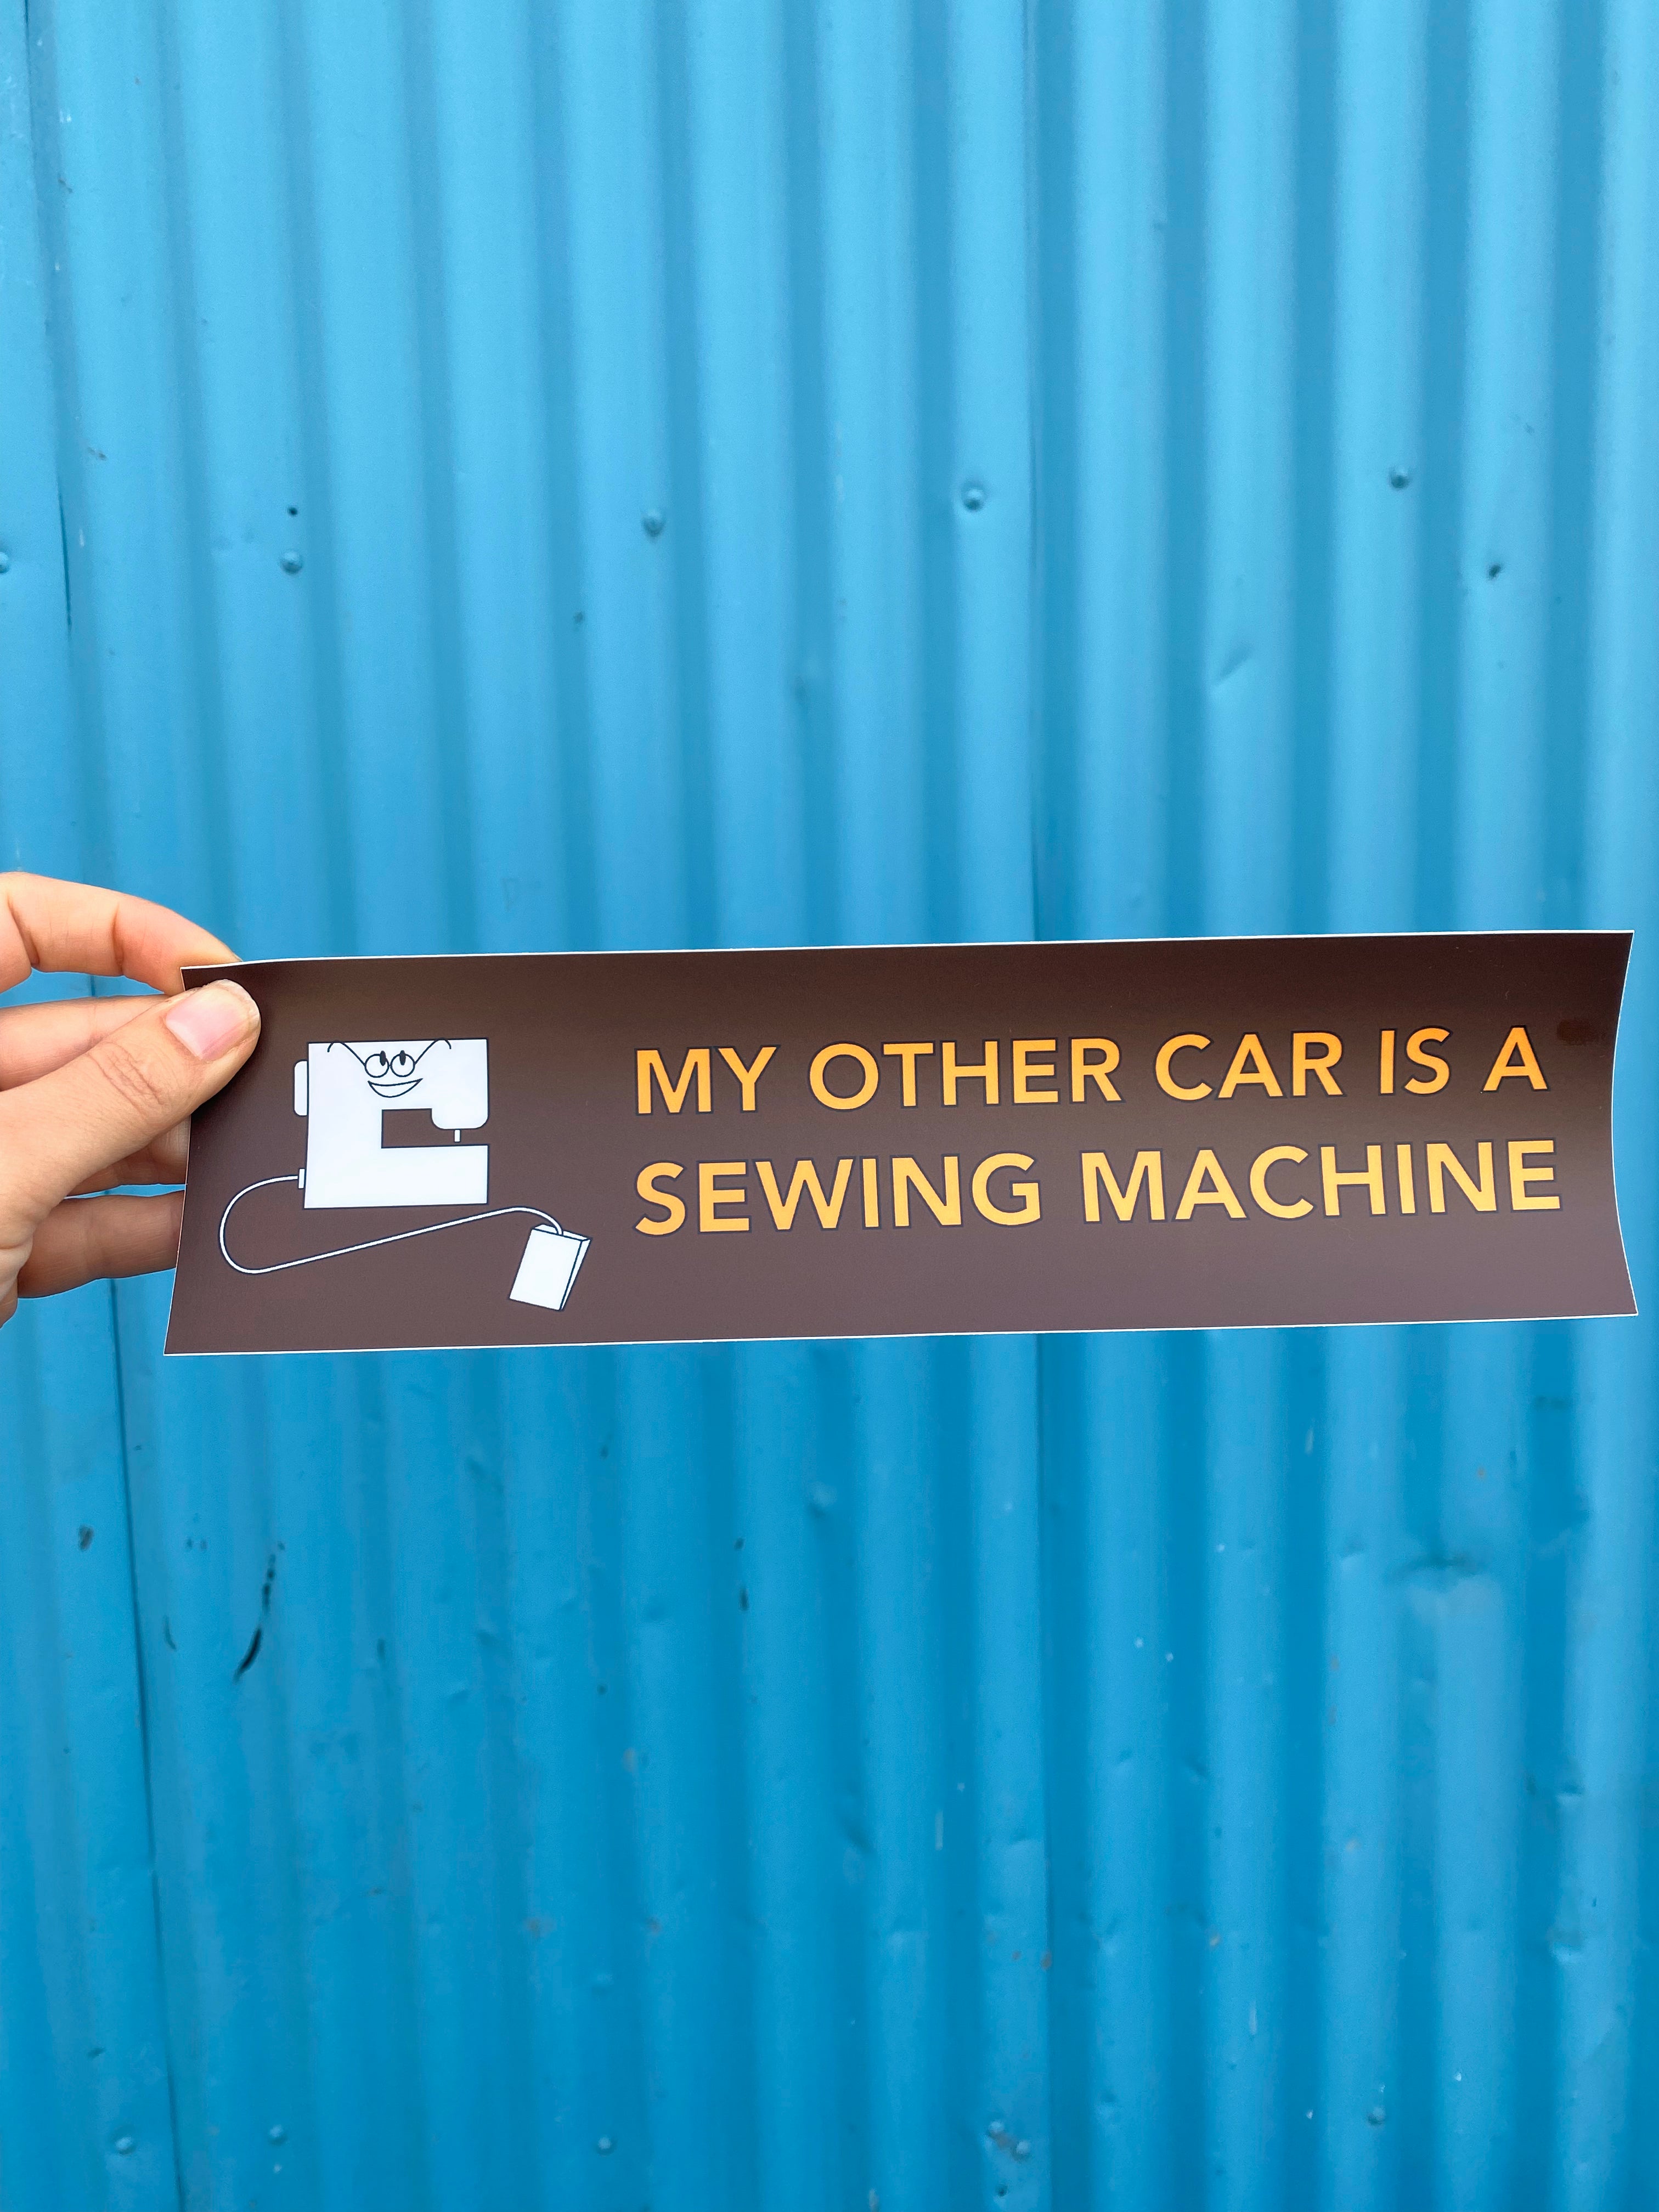 My Other Car is a Sewing Machine Bumper Sticker